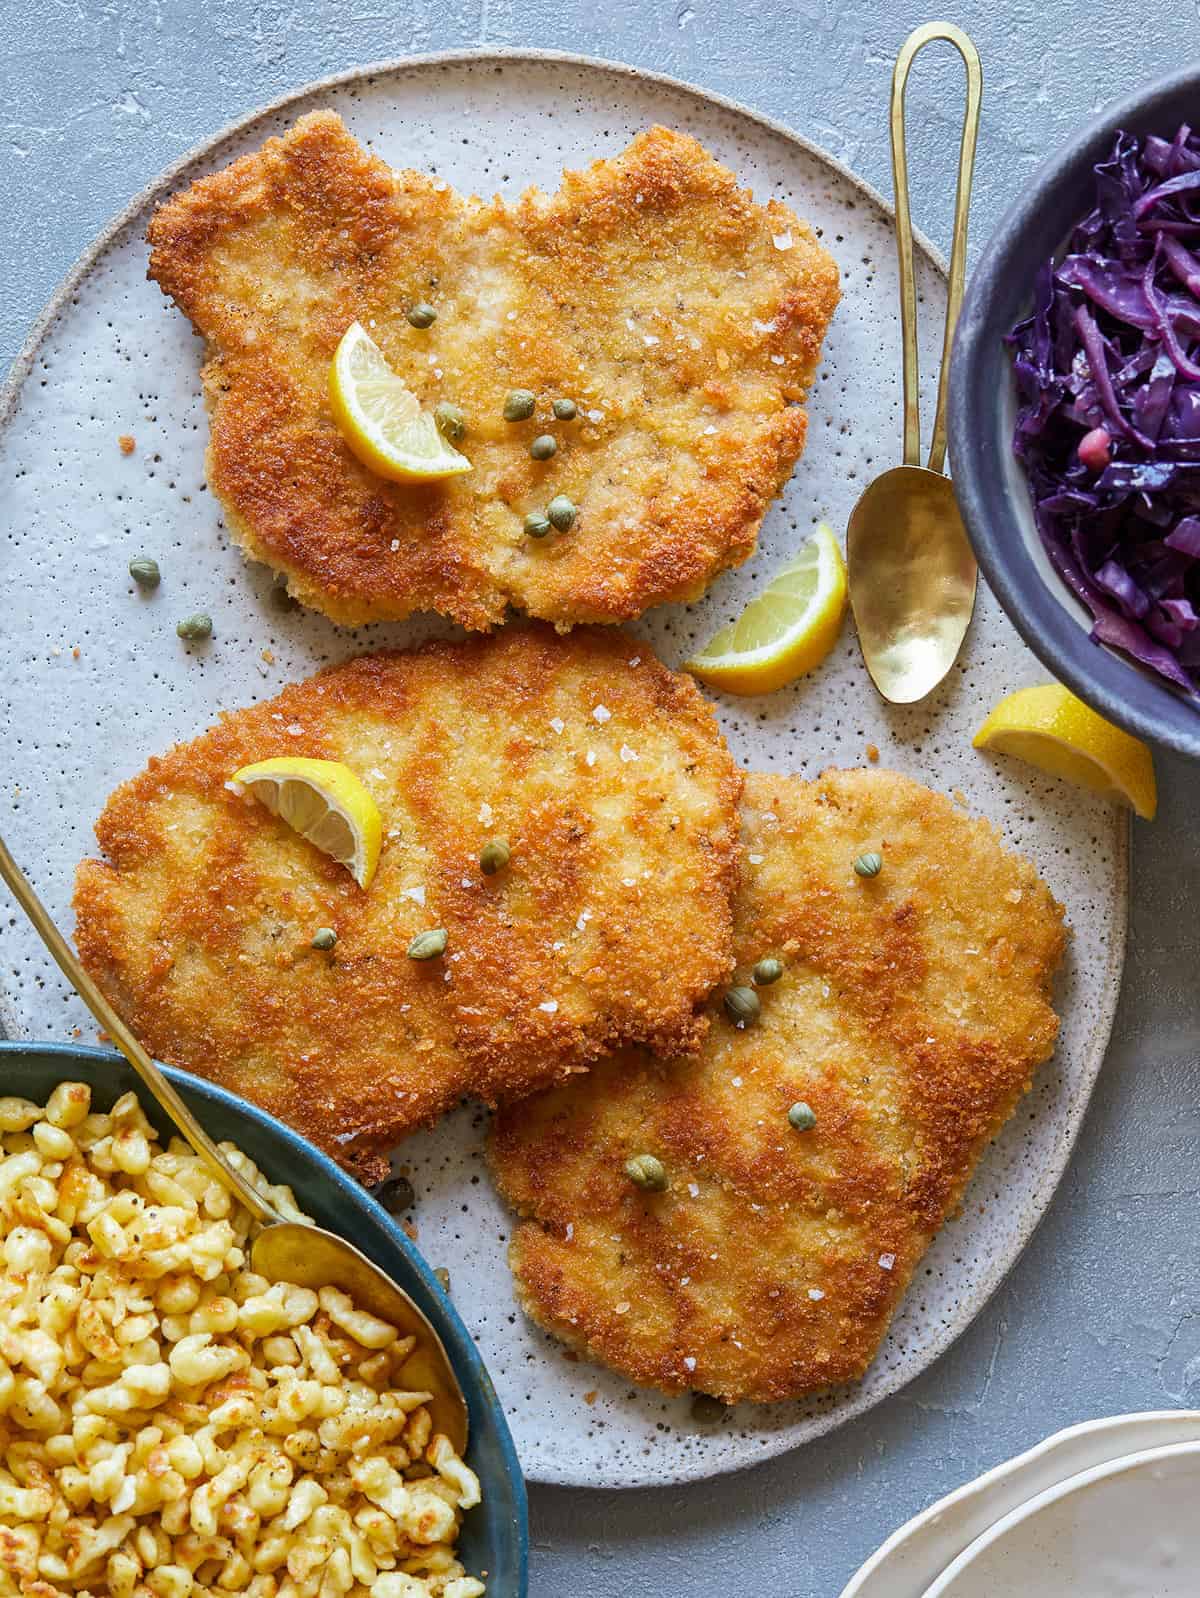 Schnitzel Over Buttered Spätzle with Sweet + Sour Cabbage